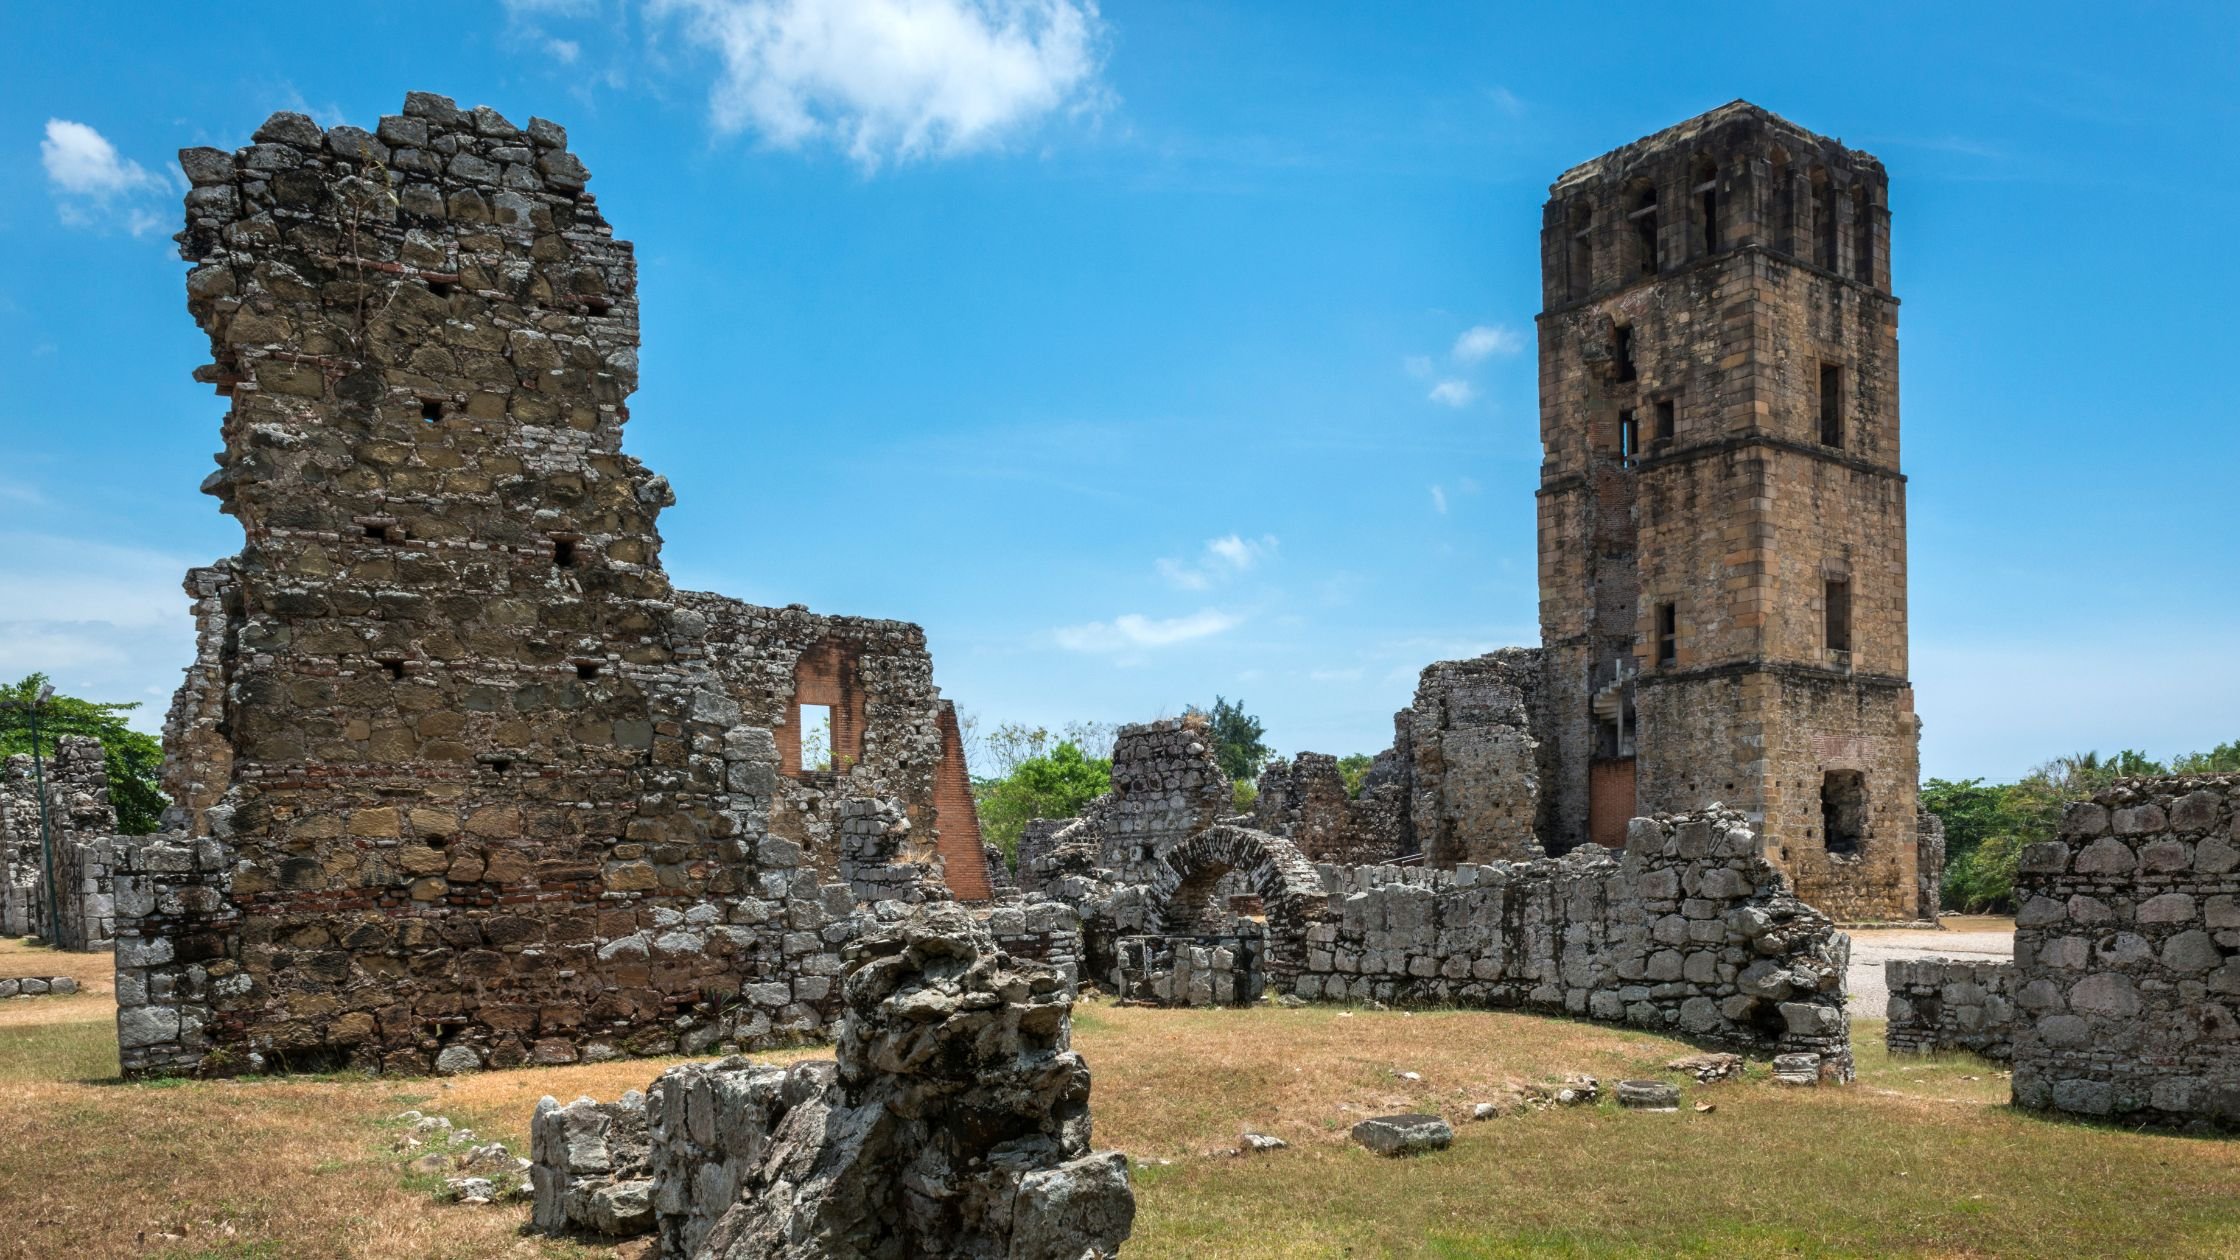 The Panama Viejo is the remains of the former Panama City and former Panamanian capital